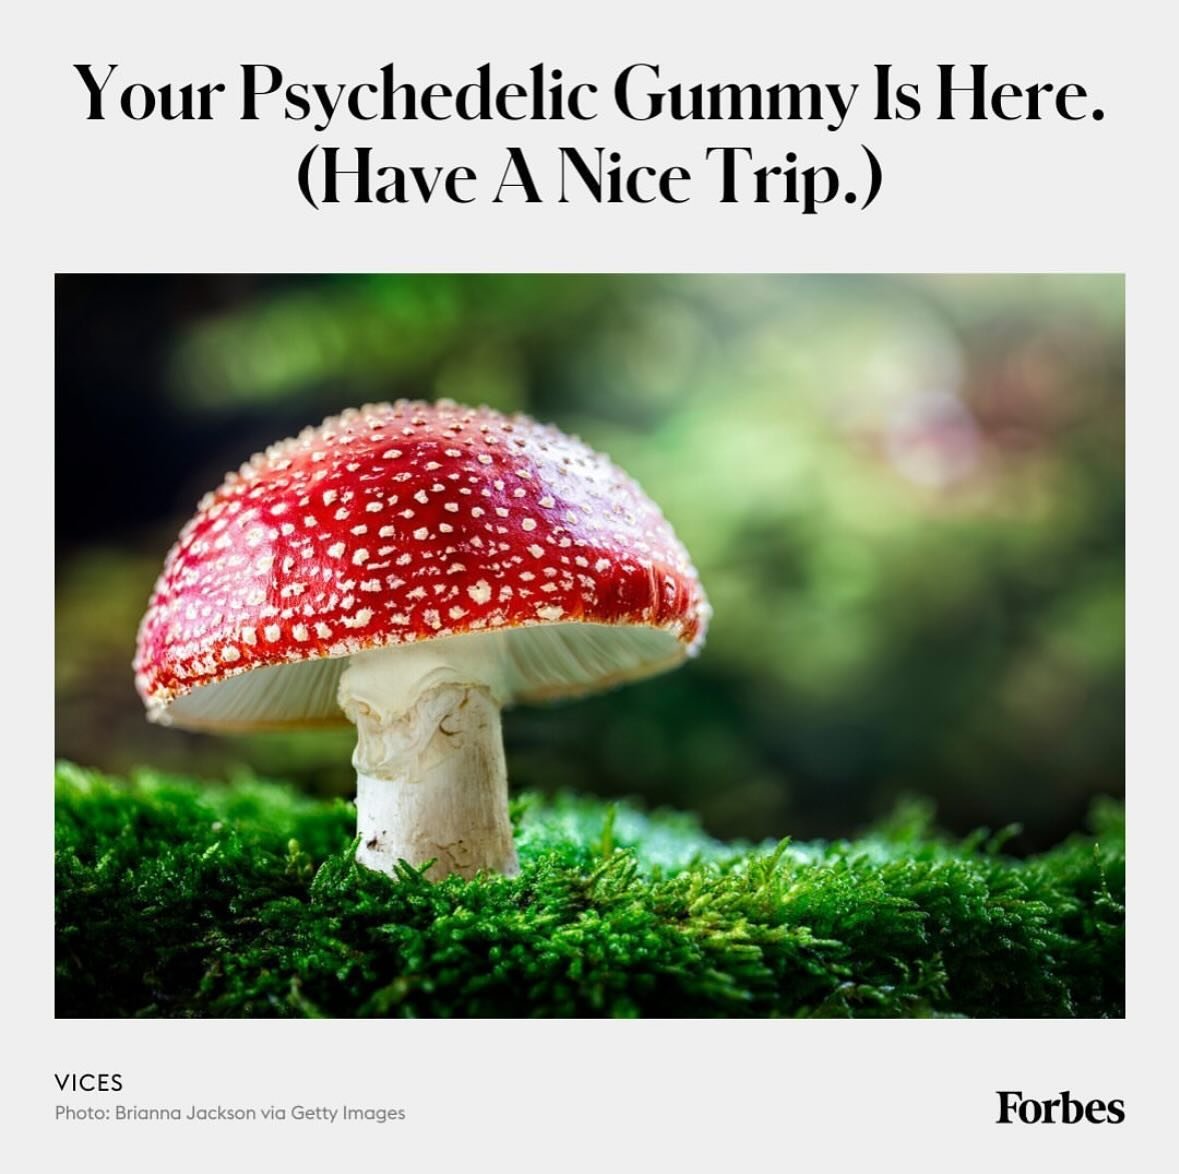 Magic mushroom edibles made with Amanita muscaria are on the rise thanks to a legal gray area.

Read more via @forbes